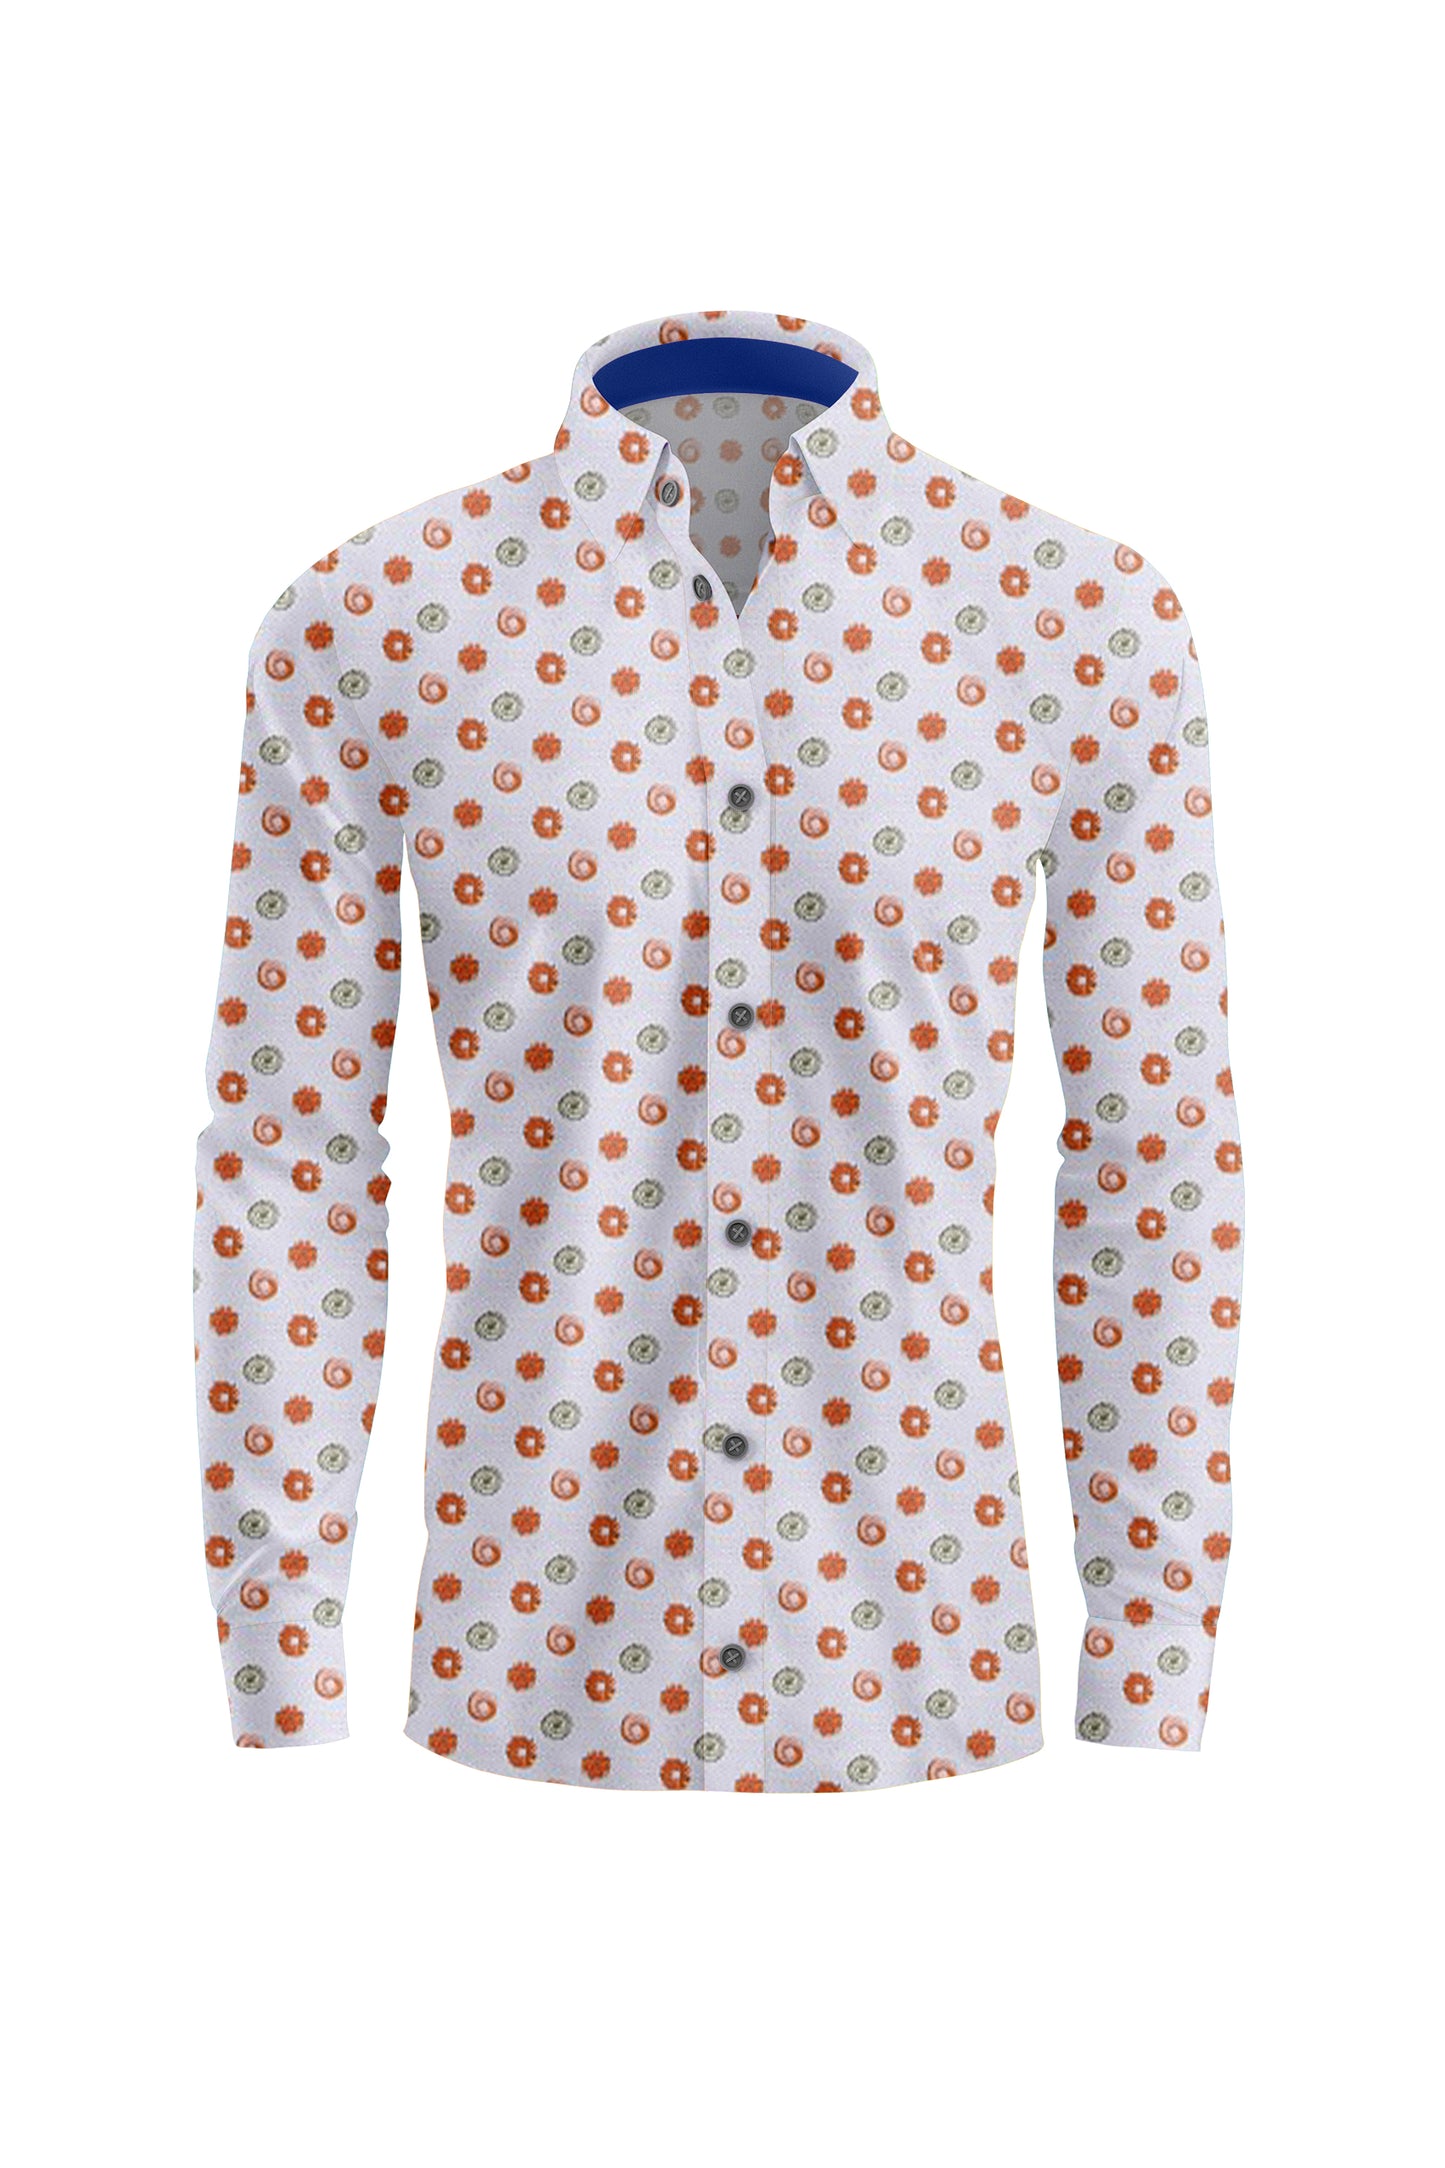 White Shirt With Blue And Brown Circles